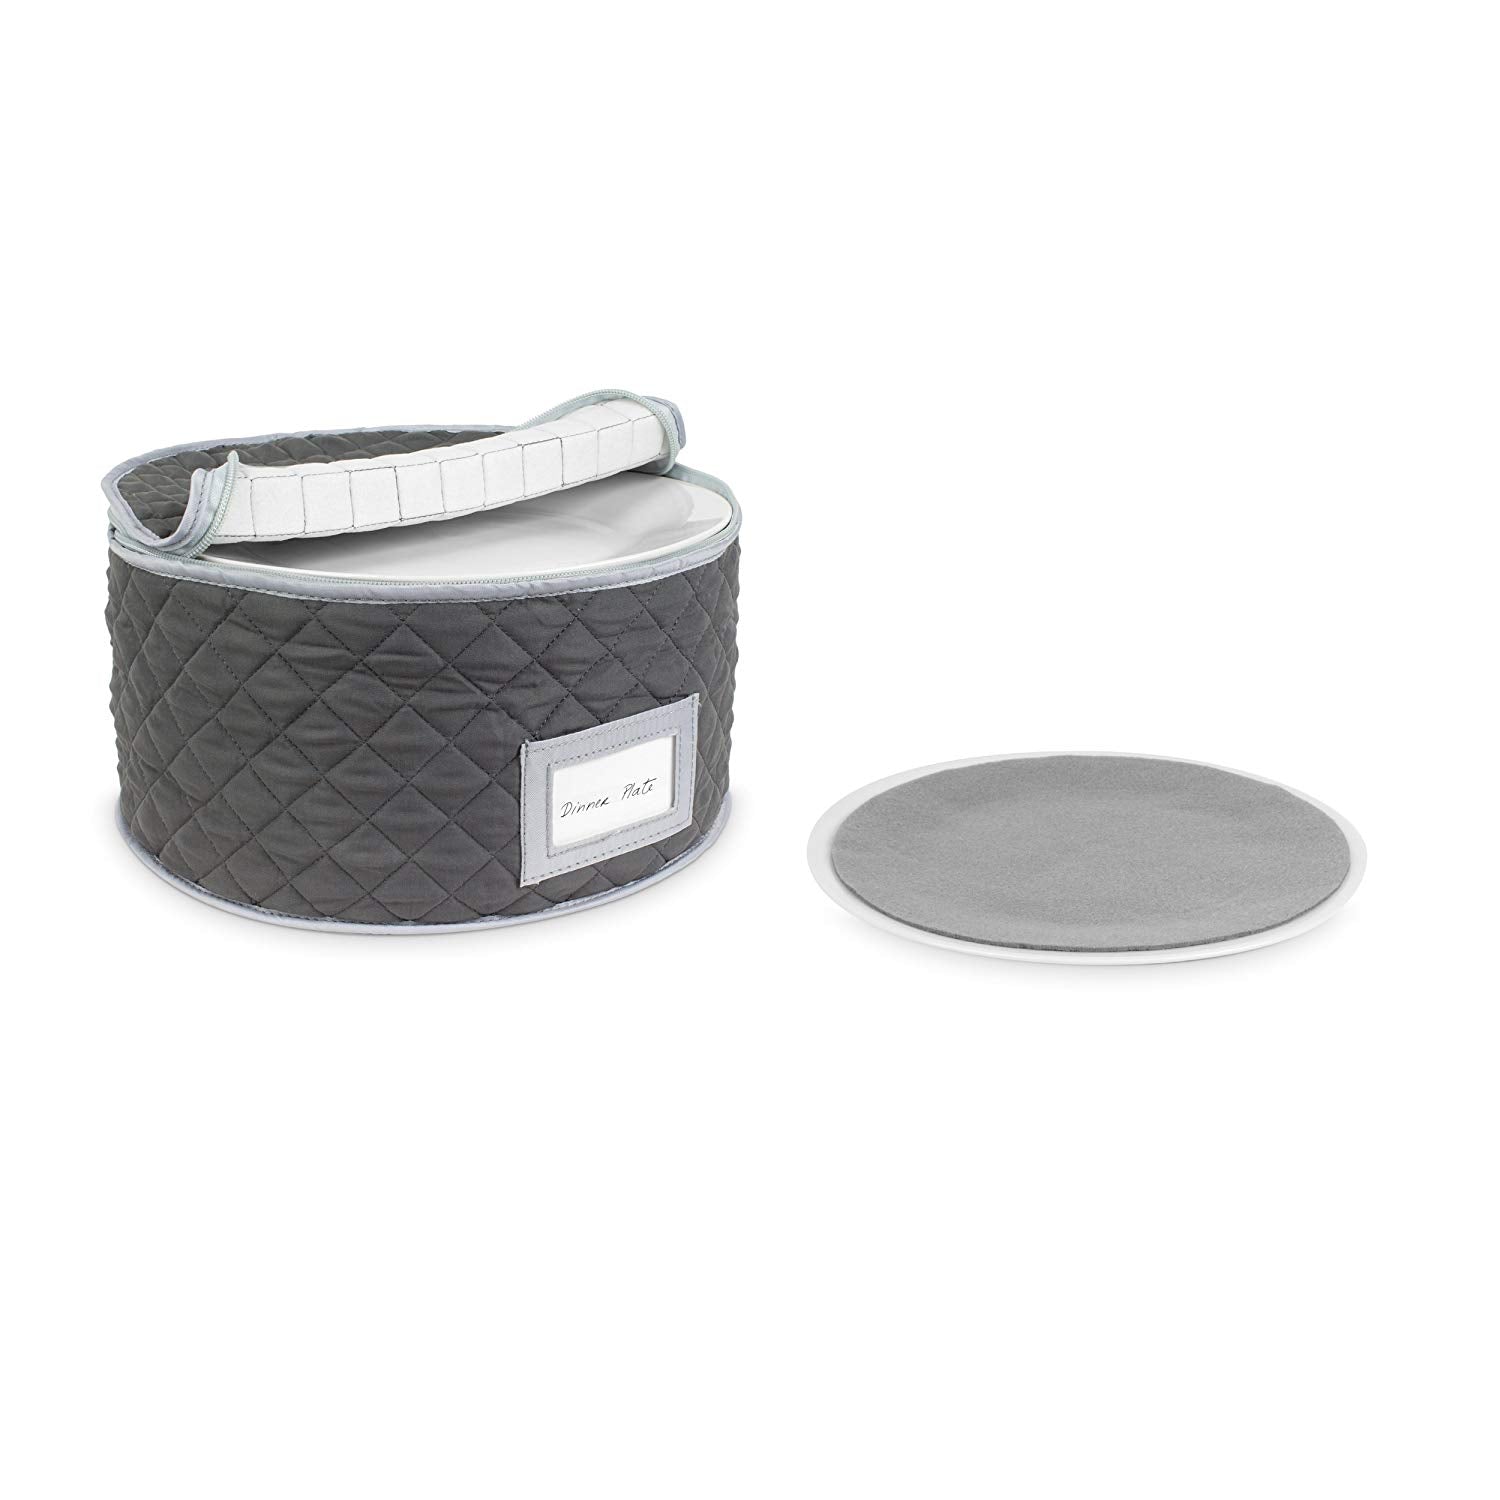 China Storage Case - Dinner Plate Quilted Case - 12 inches diameter x 7 inches height - Gray - Includes 12 Felt Separators